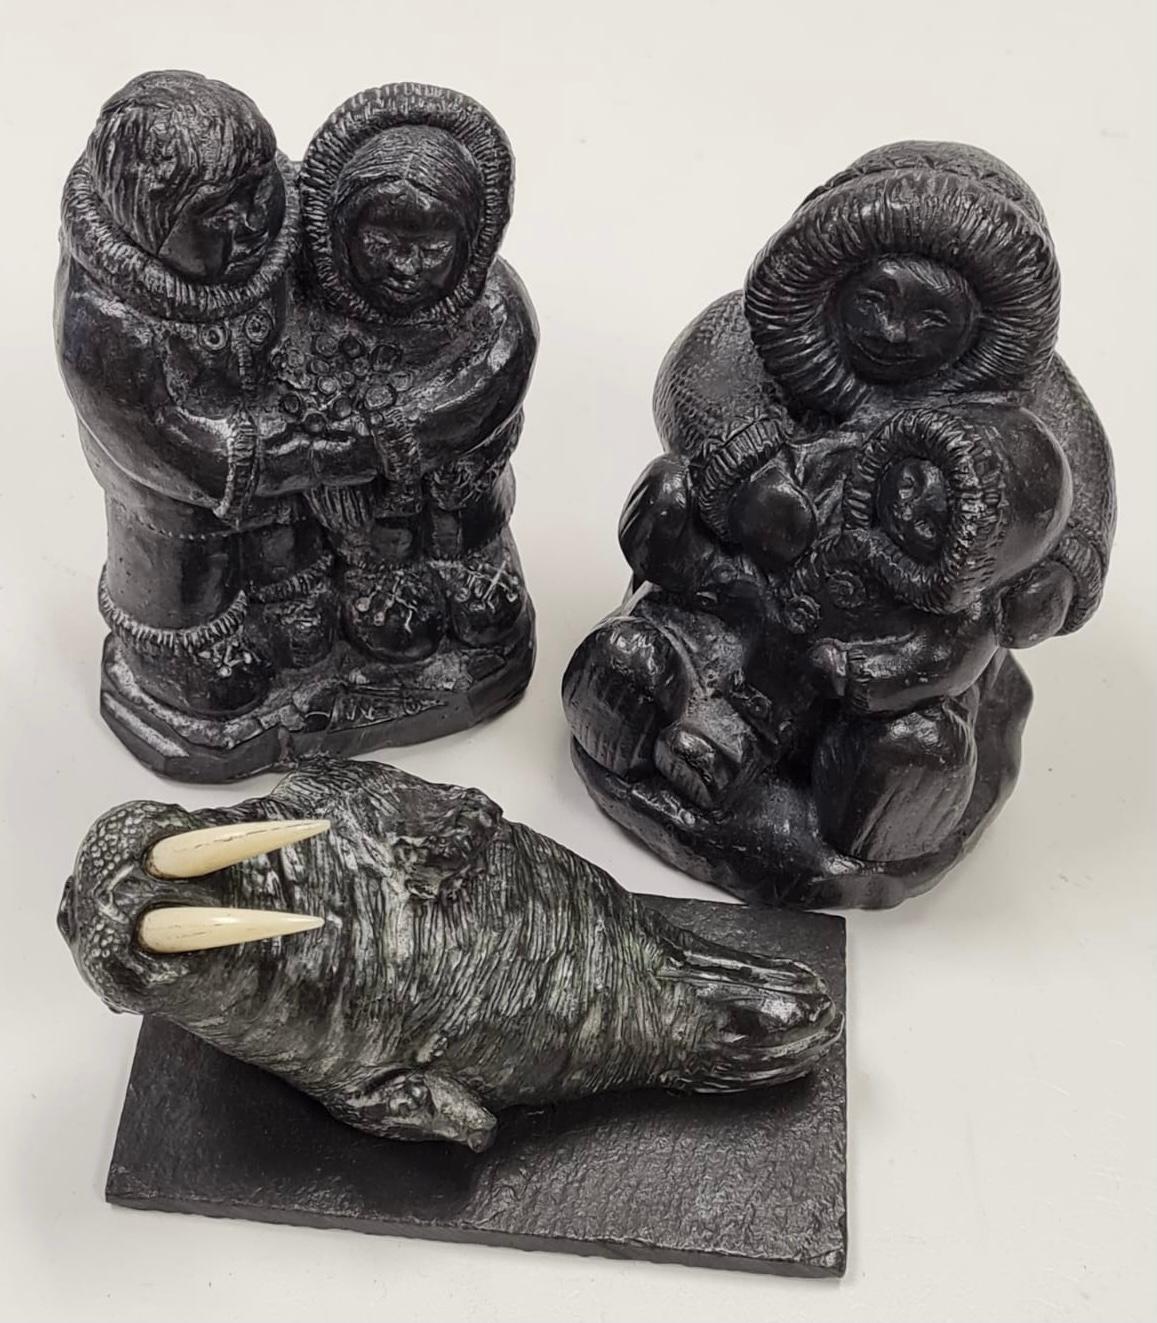 3 x Carved Canadian Inuit Figures.